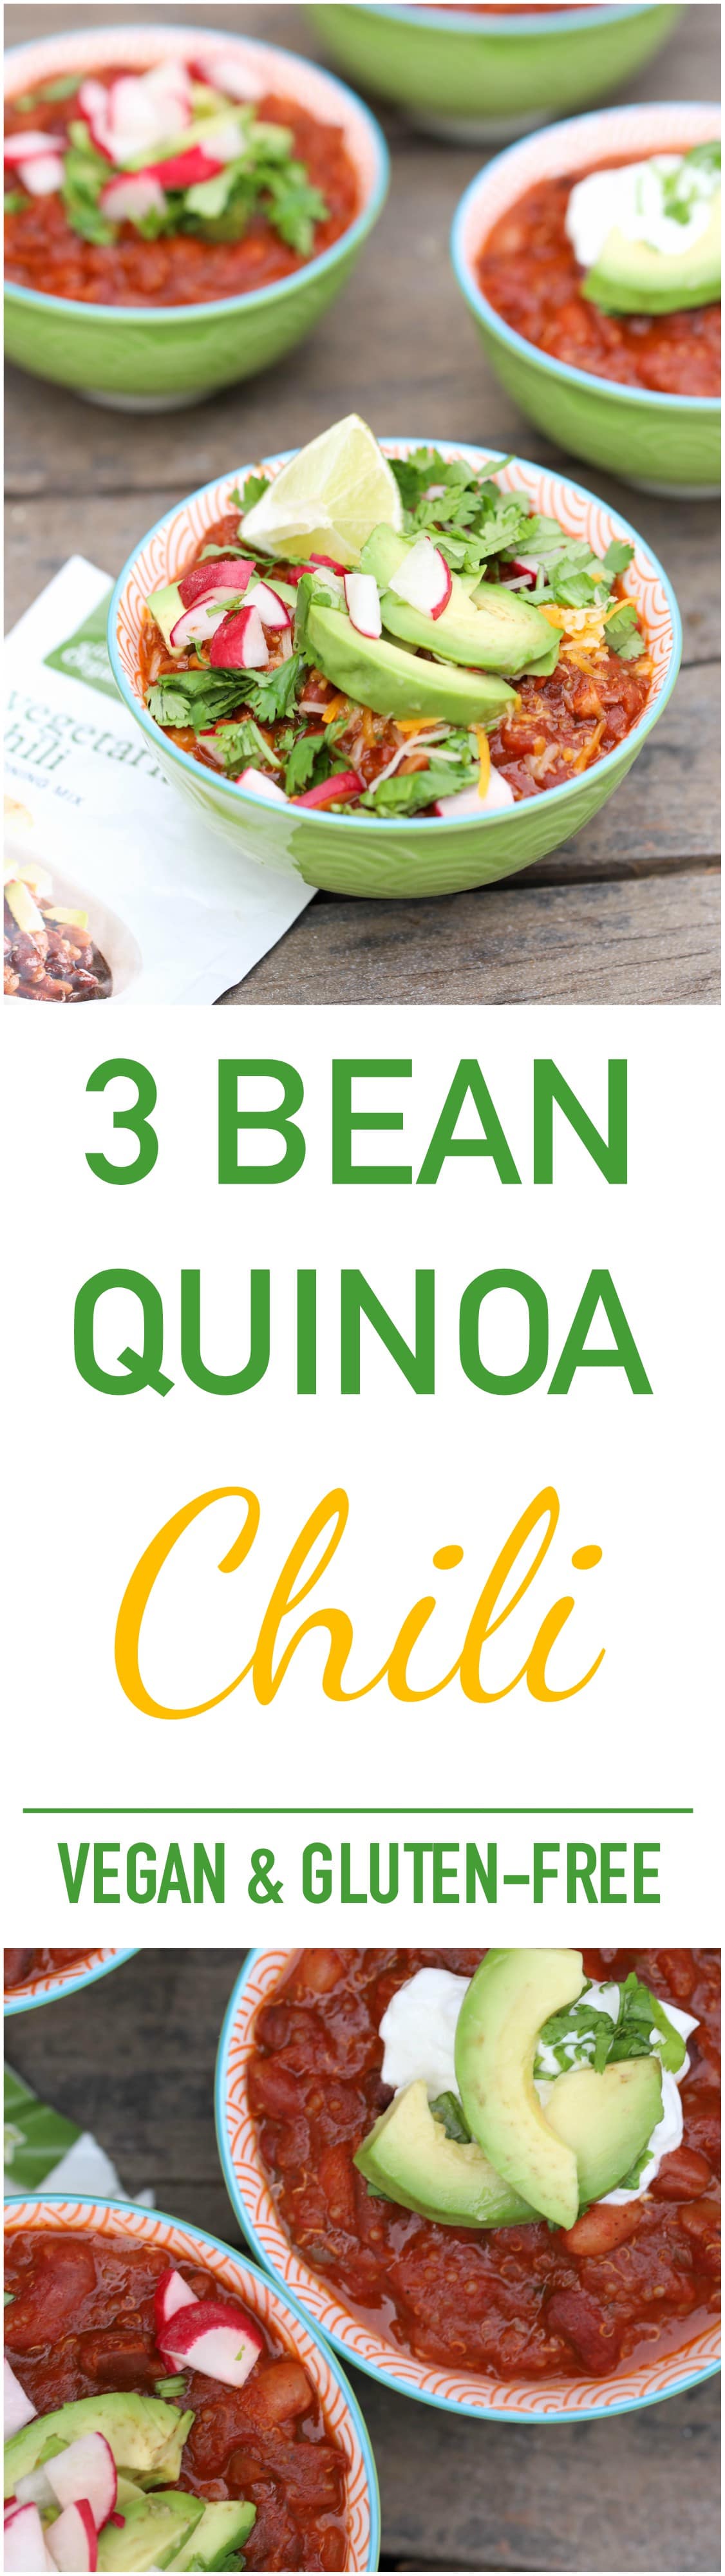 3 Bean Quinoa Chili is a vegetarian chili that is hearty, delicious, and only needs one pot. It is naturally vegan, gluten-free, and very nutritious! 